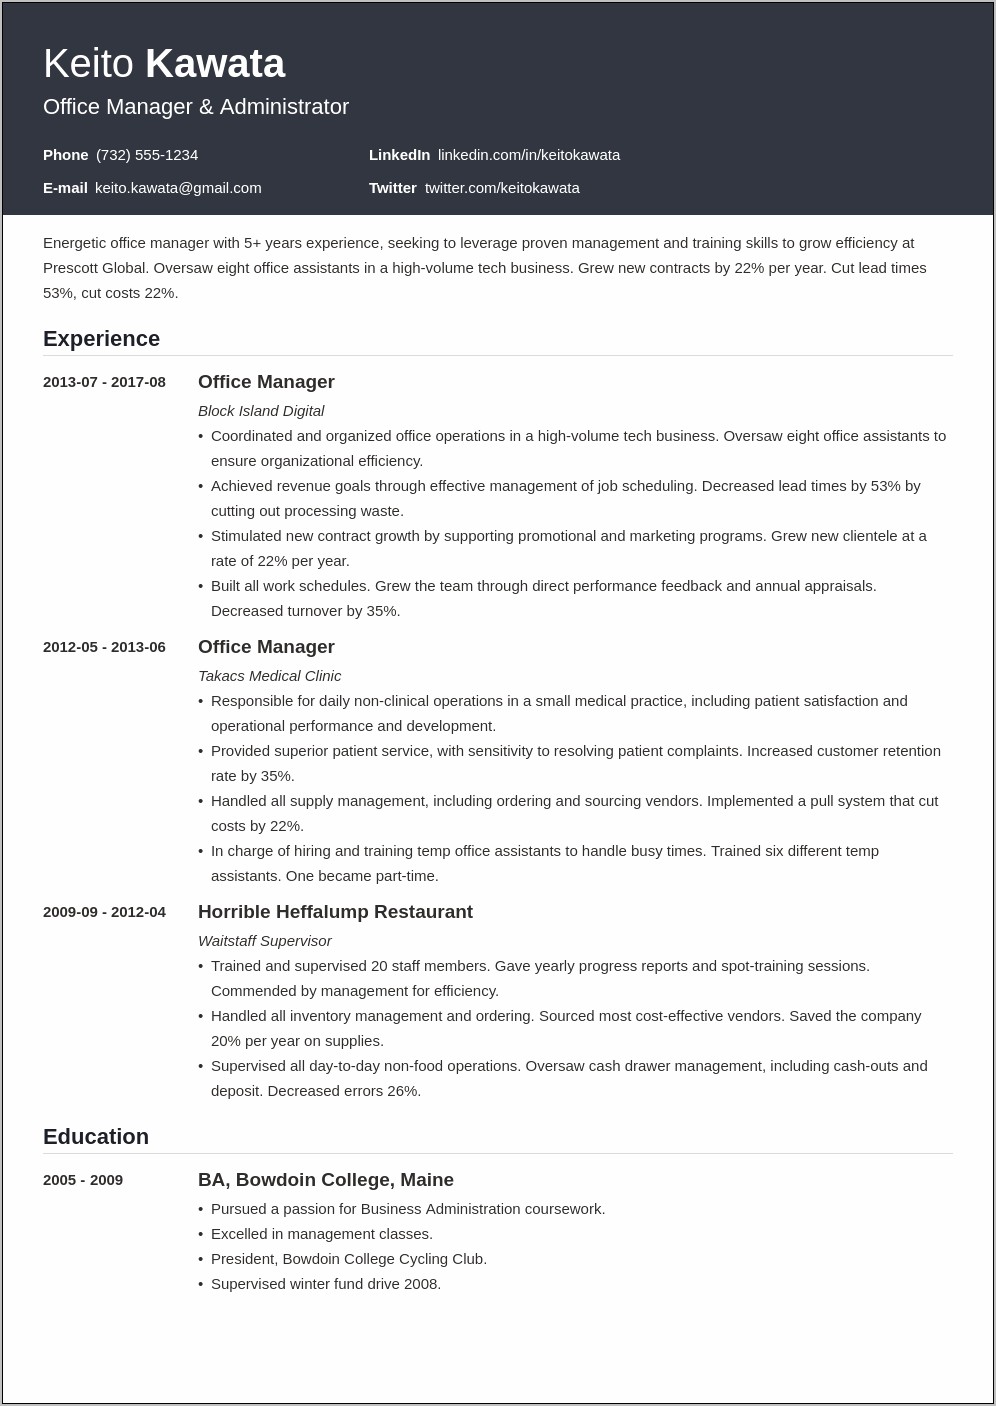 Sample Resume For Construction Office Manager